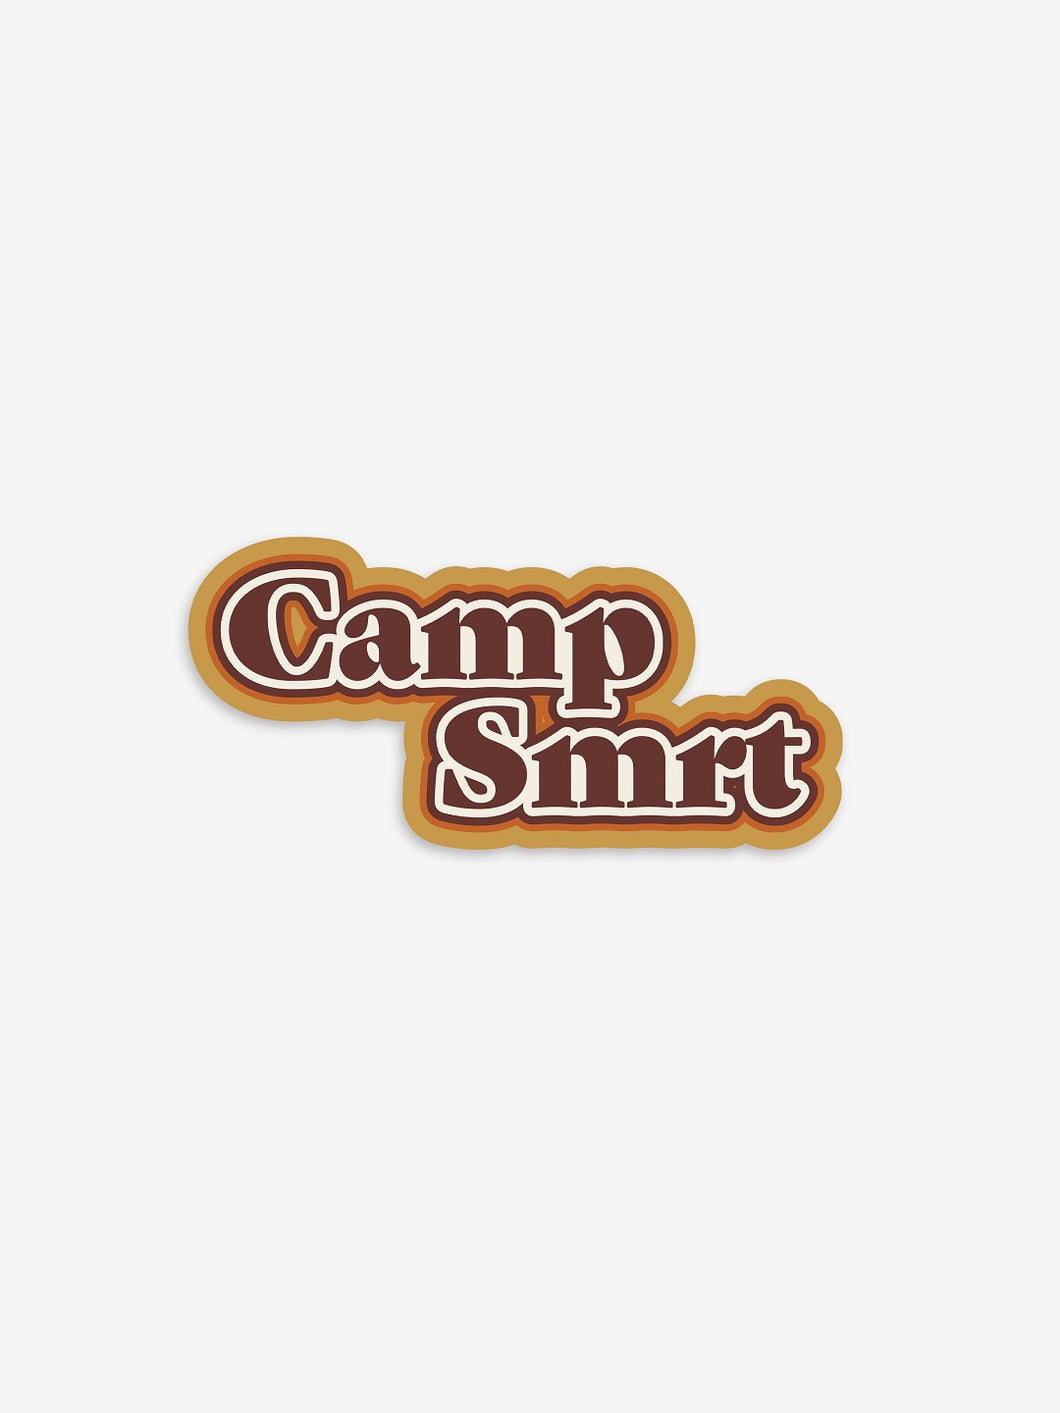 Pictured is a sticker that has the words Camp SMRT in retro brown with a three layered outline of white, orange, and light brown. Perfect to stick on your 4runner or roof tent rack! Available for sale by SMRT Tent in Edmonton, Canada.